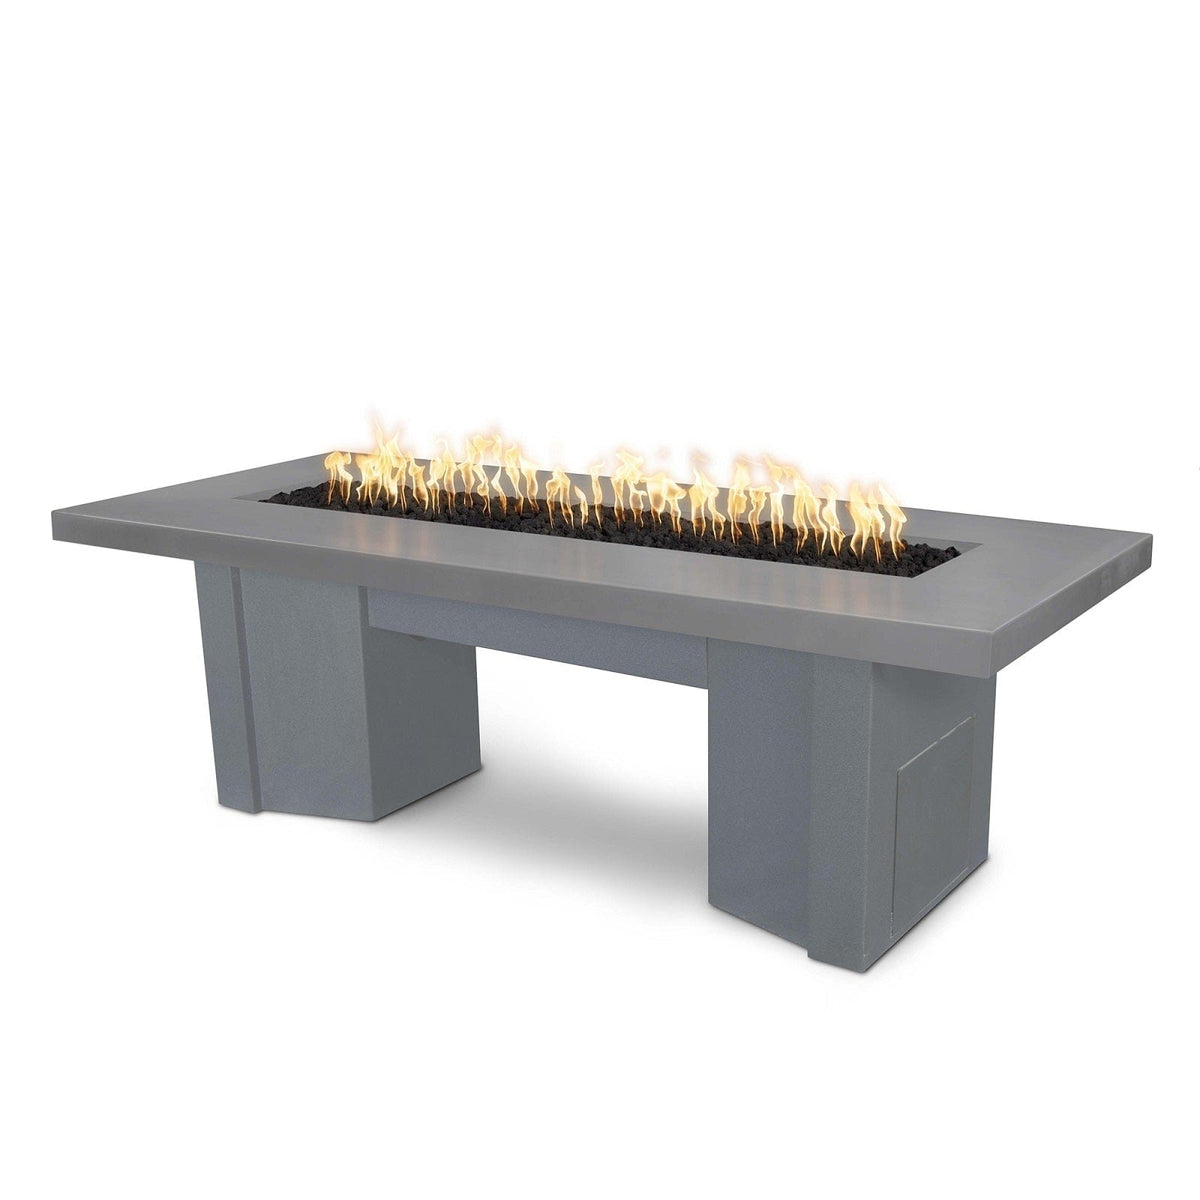 The Outdoor Plus Fire Features Natural Gray (-NGY) / Gray Powder Coated Steel (-GRY) The Outdoor Plus 78&quot; Alameda Fire Table Smooth Concrete in Liquid Propane - Match Lit / OPT-ALMGFRC78-LP